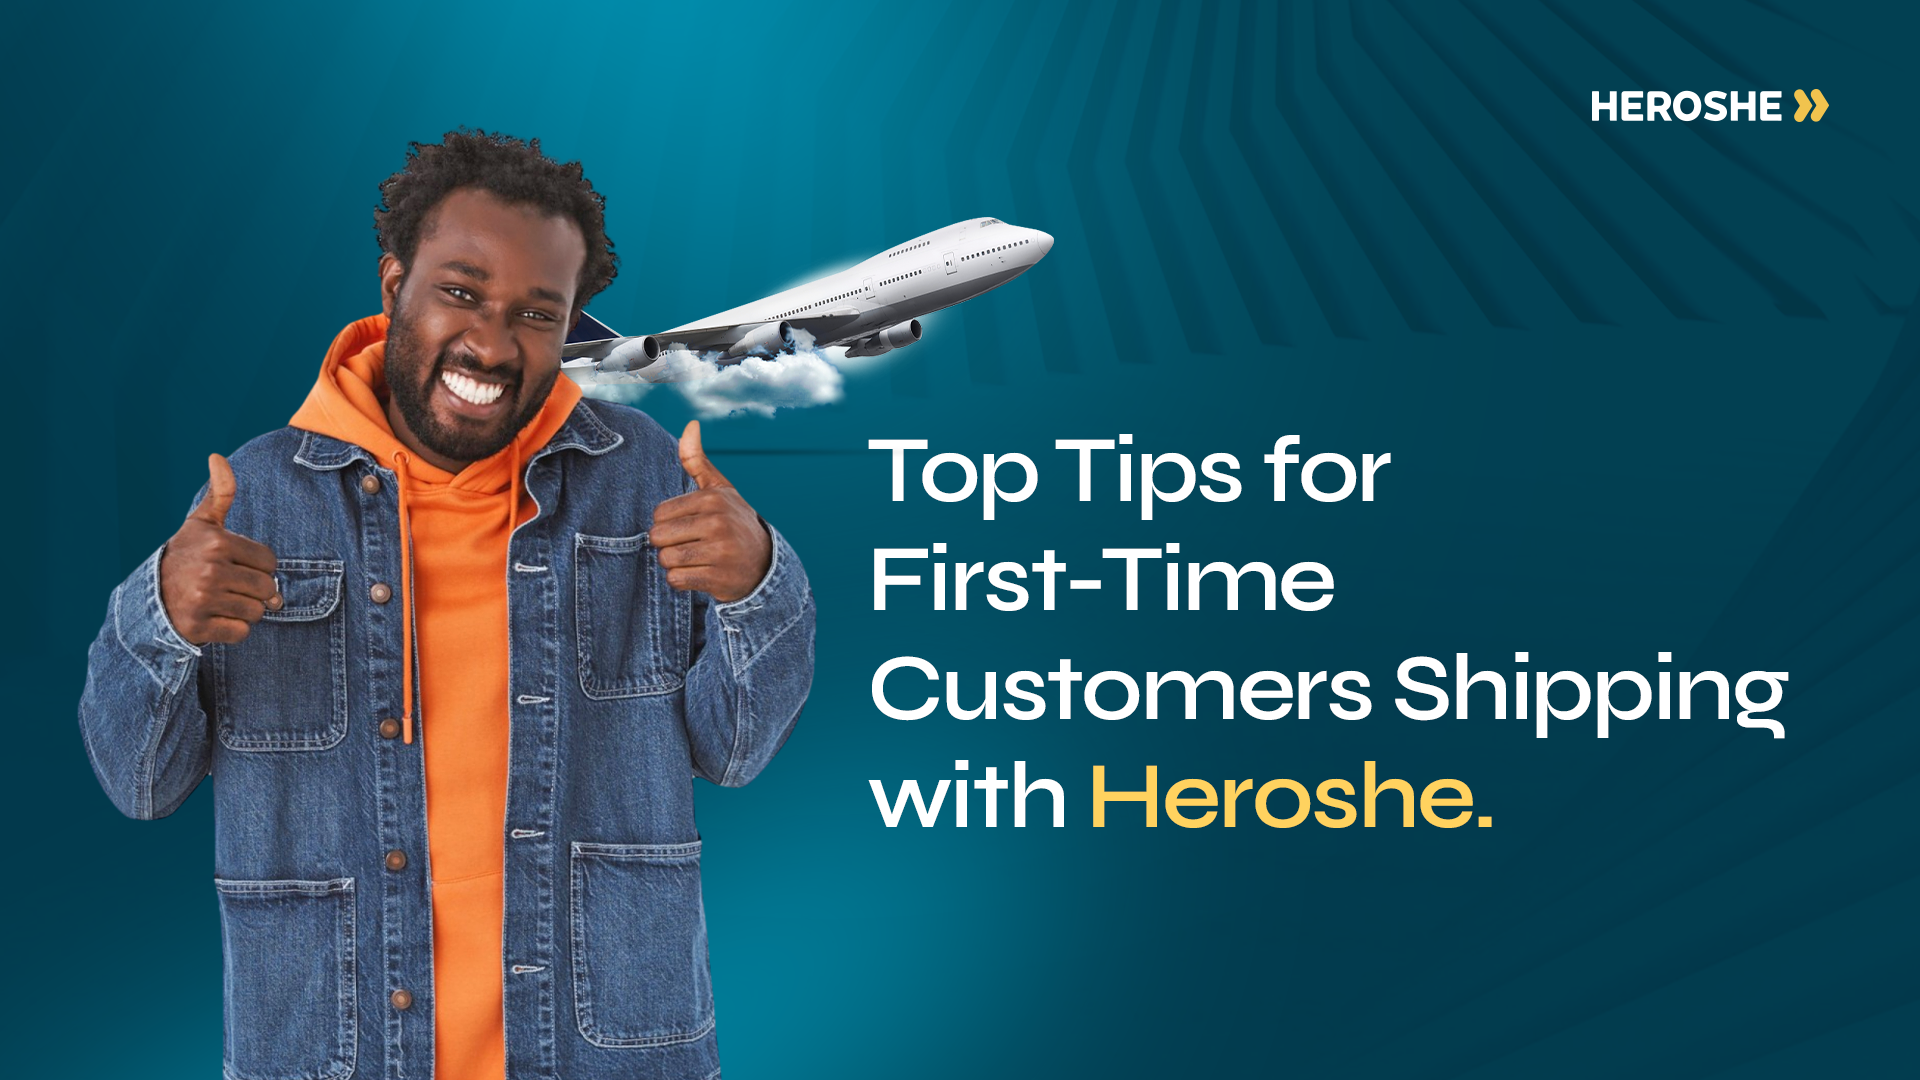 10 Simple Tips Every Heroshe First-Time Customer Will Benefit From